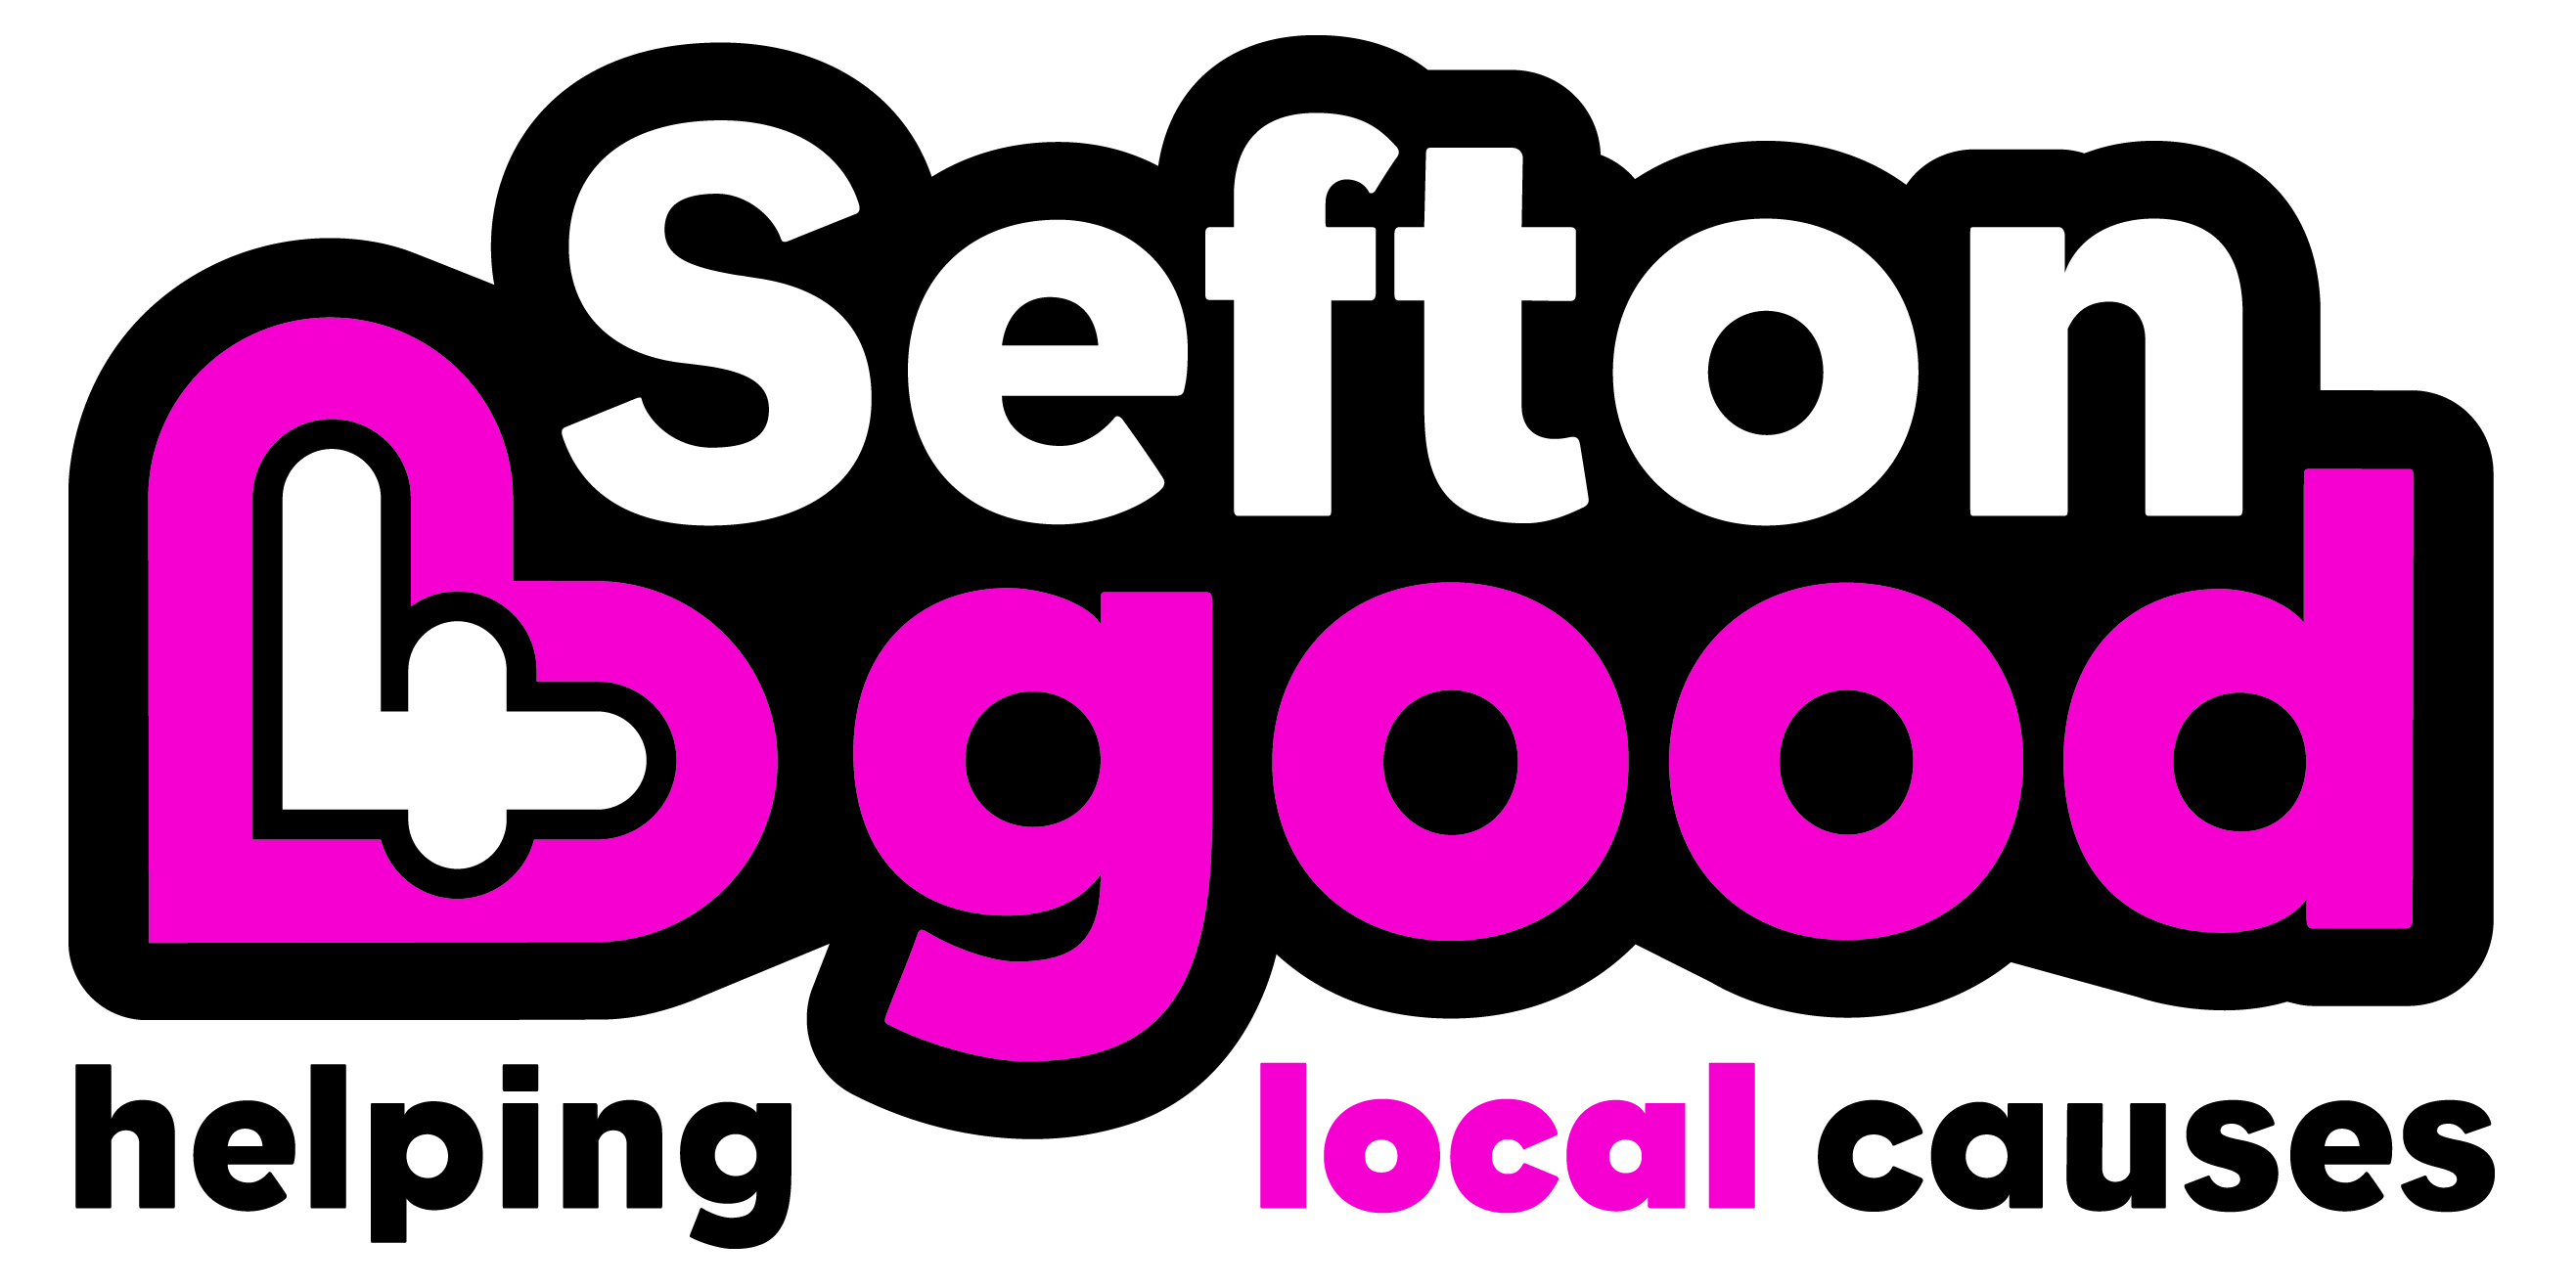 Fundraising appeal: donate to Sefton 4 Good and support vital initiatives in response to the COVID-19 outbreak